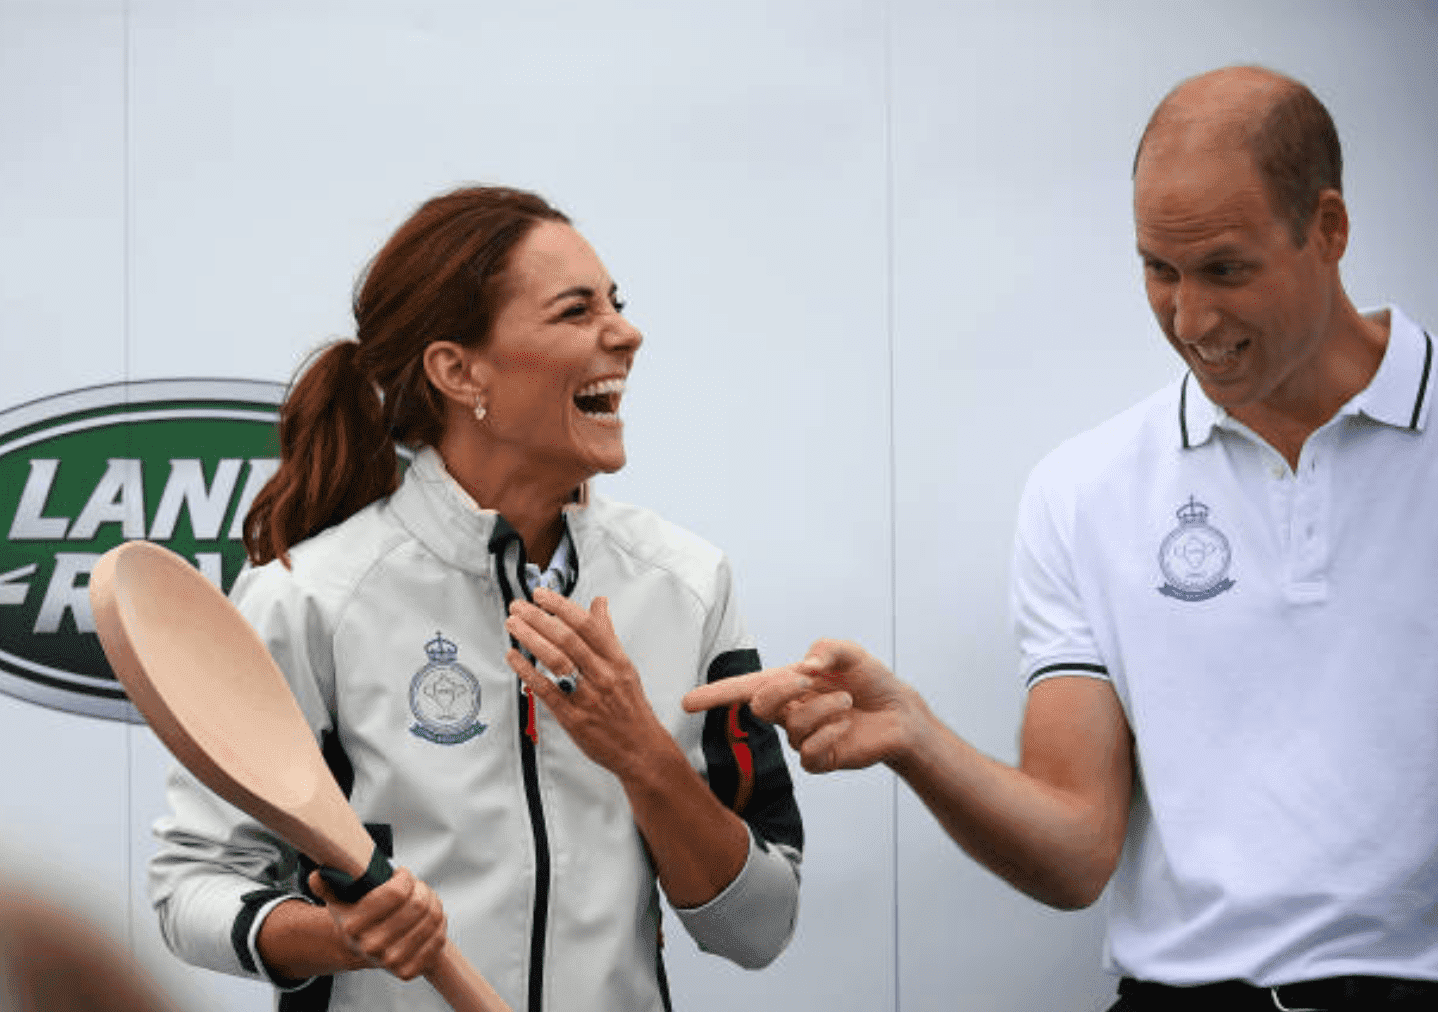 Kate Middleton receiving the wooden spoon at The King's Cup regatta, Isle of Wright | GettyImages